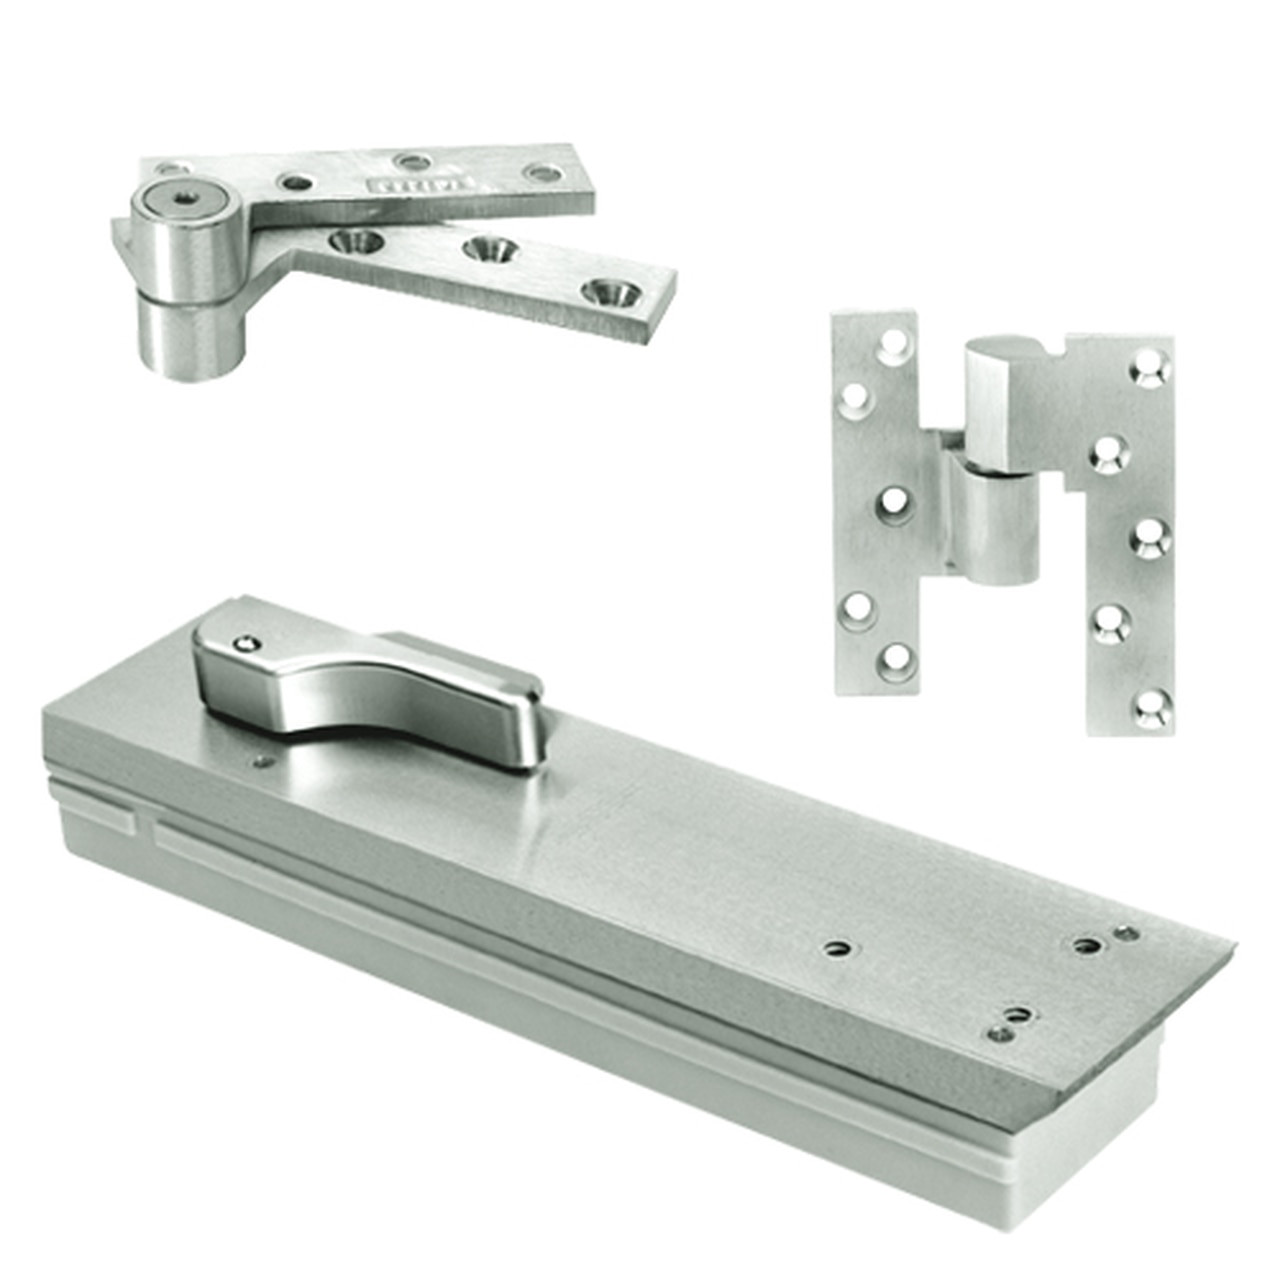 FQ5103NBC-LFP-LTP-LH-618 Rixson Q51 Series Fire Rated 3/4" Offset Hung Shallow Depth Floor Closers in Bright Nickel Finish